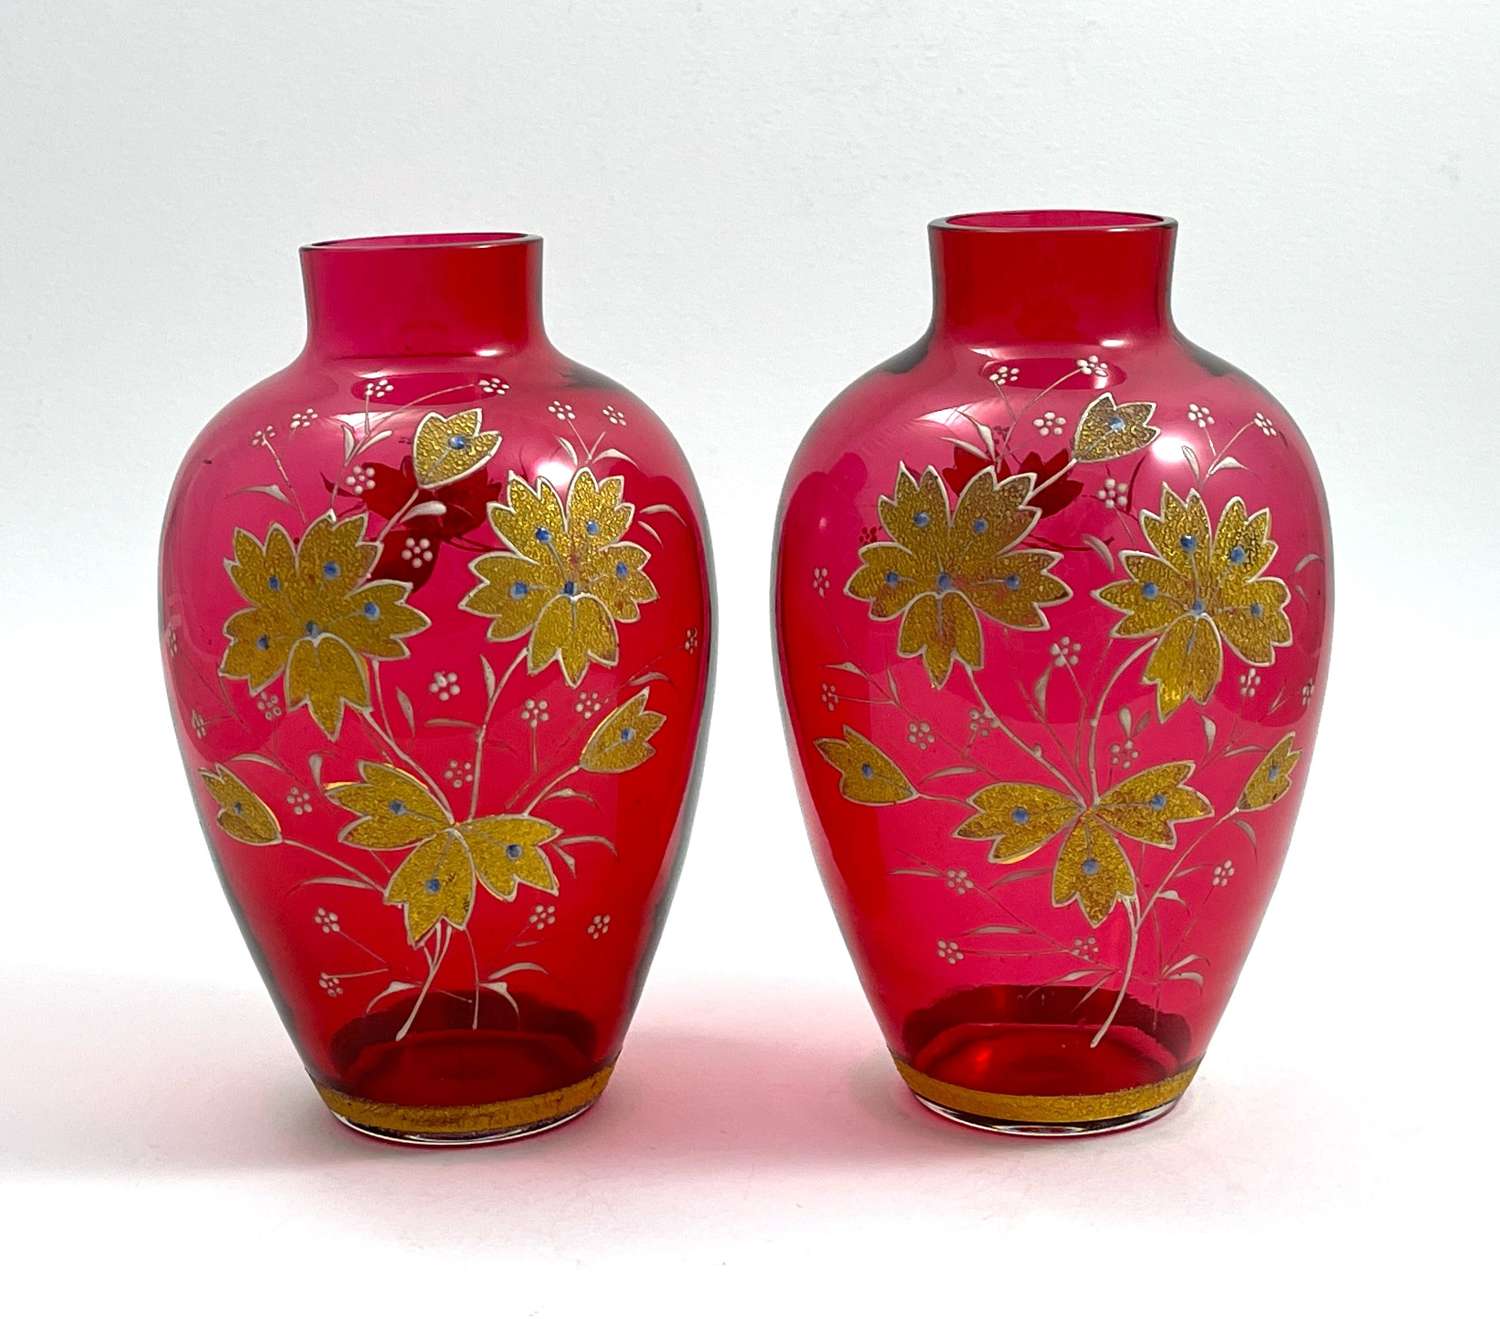 Pair of Antique MOSER Cranberry Crystal Glass Enamelled Vases